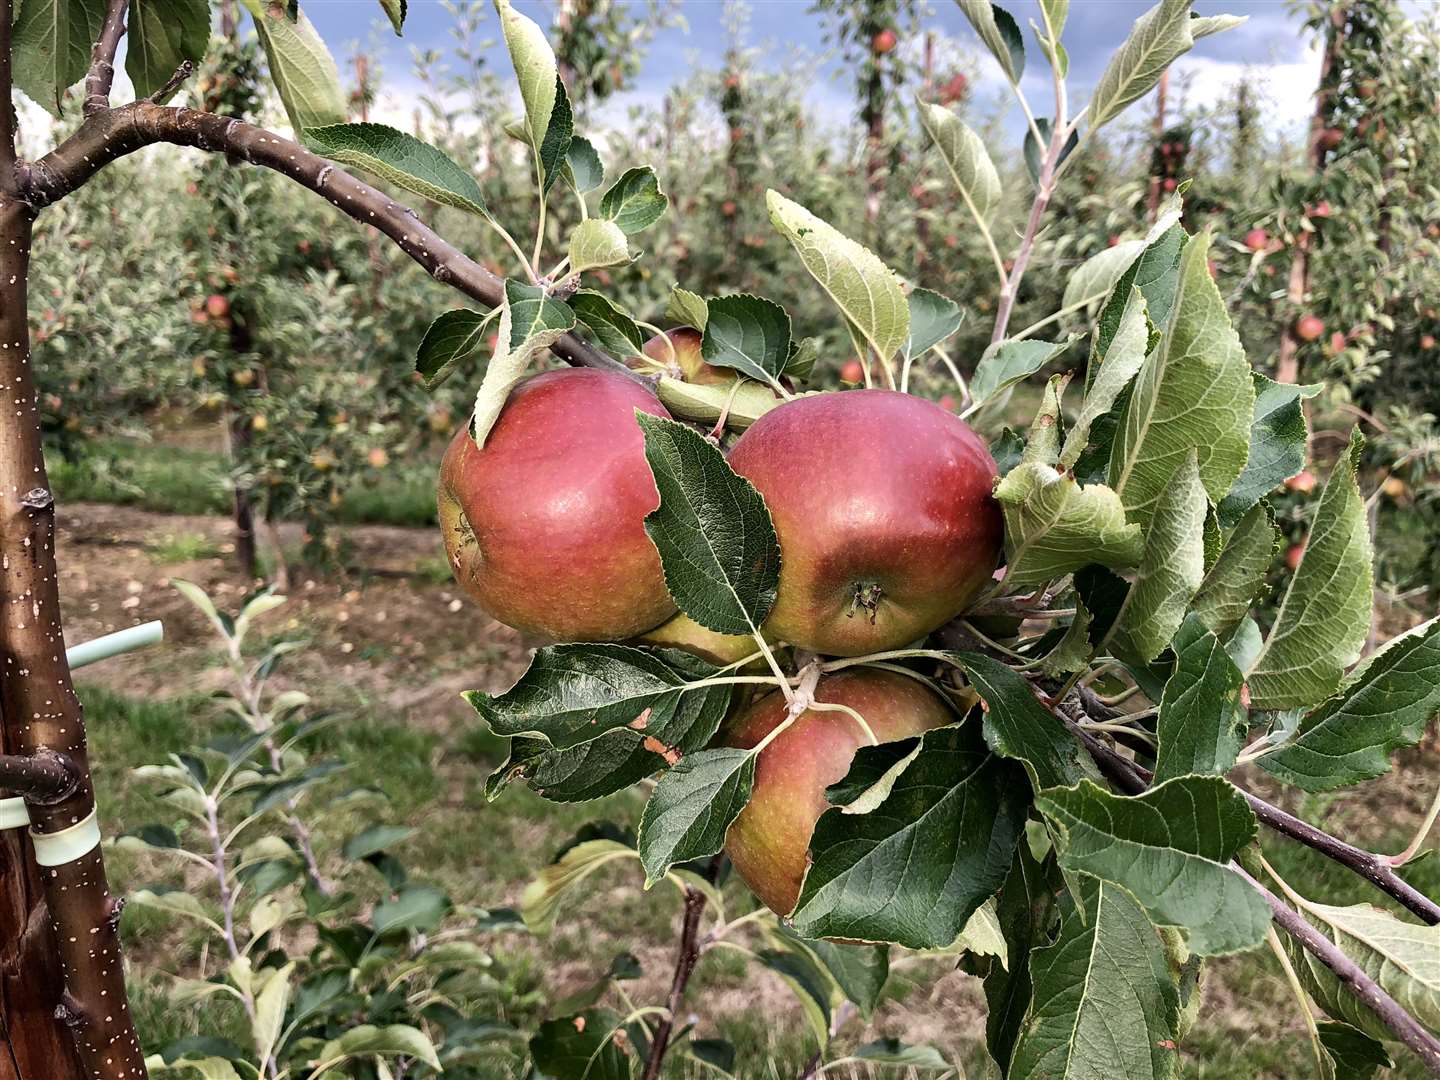 The apple harvest is one of the most important for Kent's growers